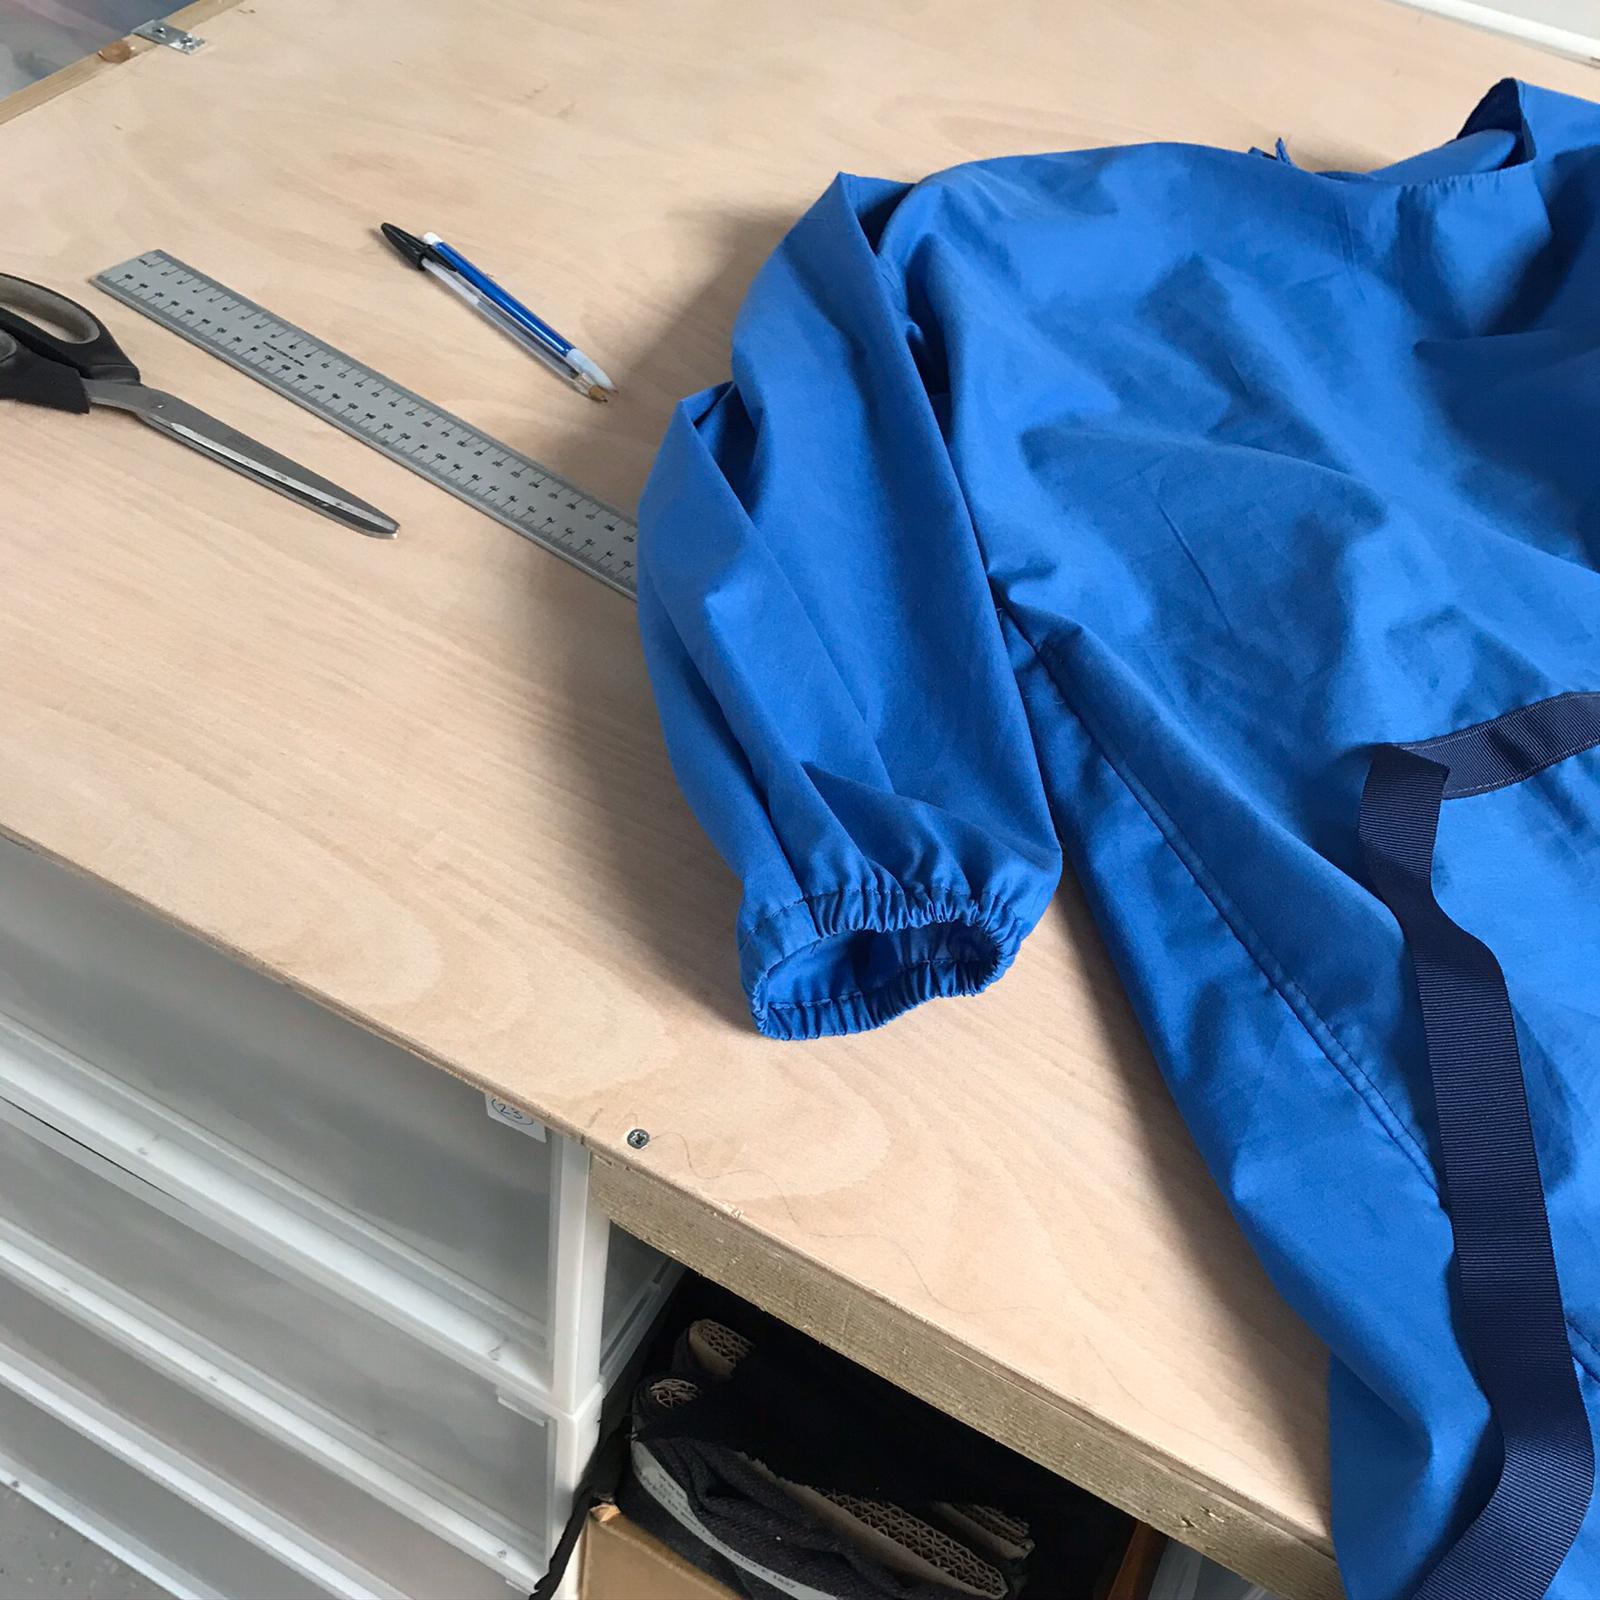 Community Project | Helping to Sew Protective Gowns for NHS